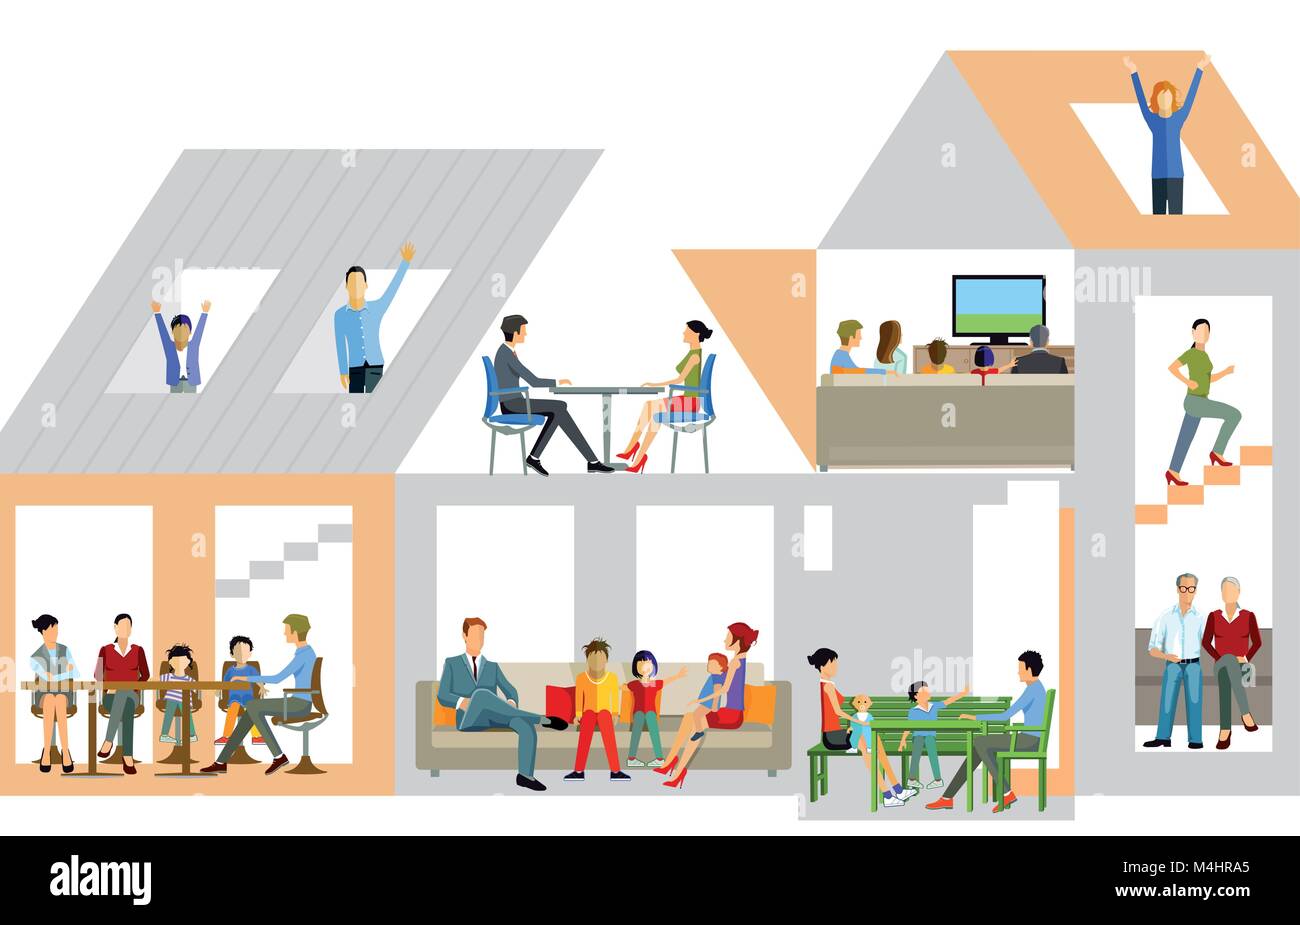 Family life in the house, illustration Stock Vector